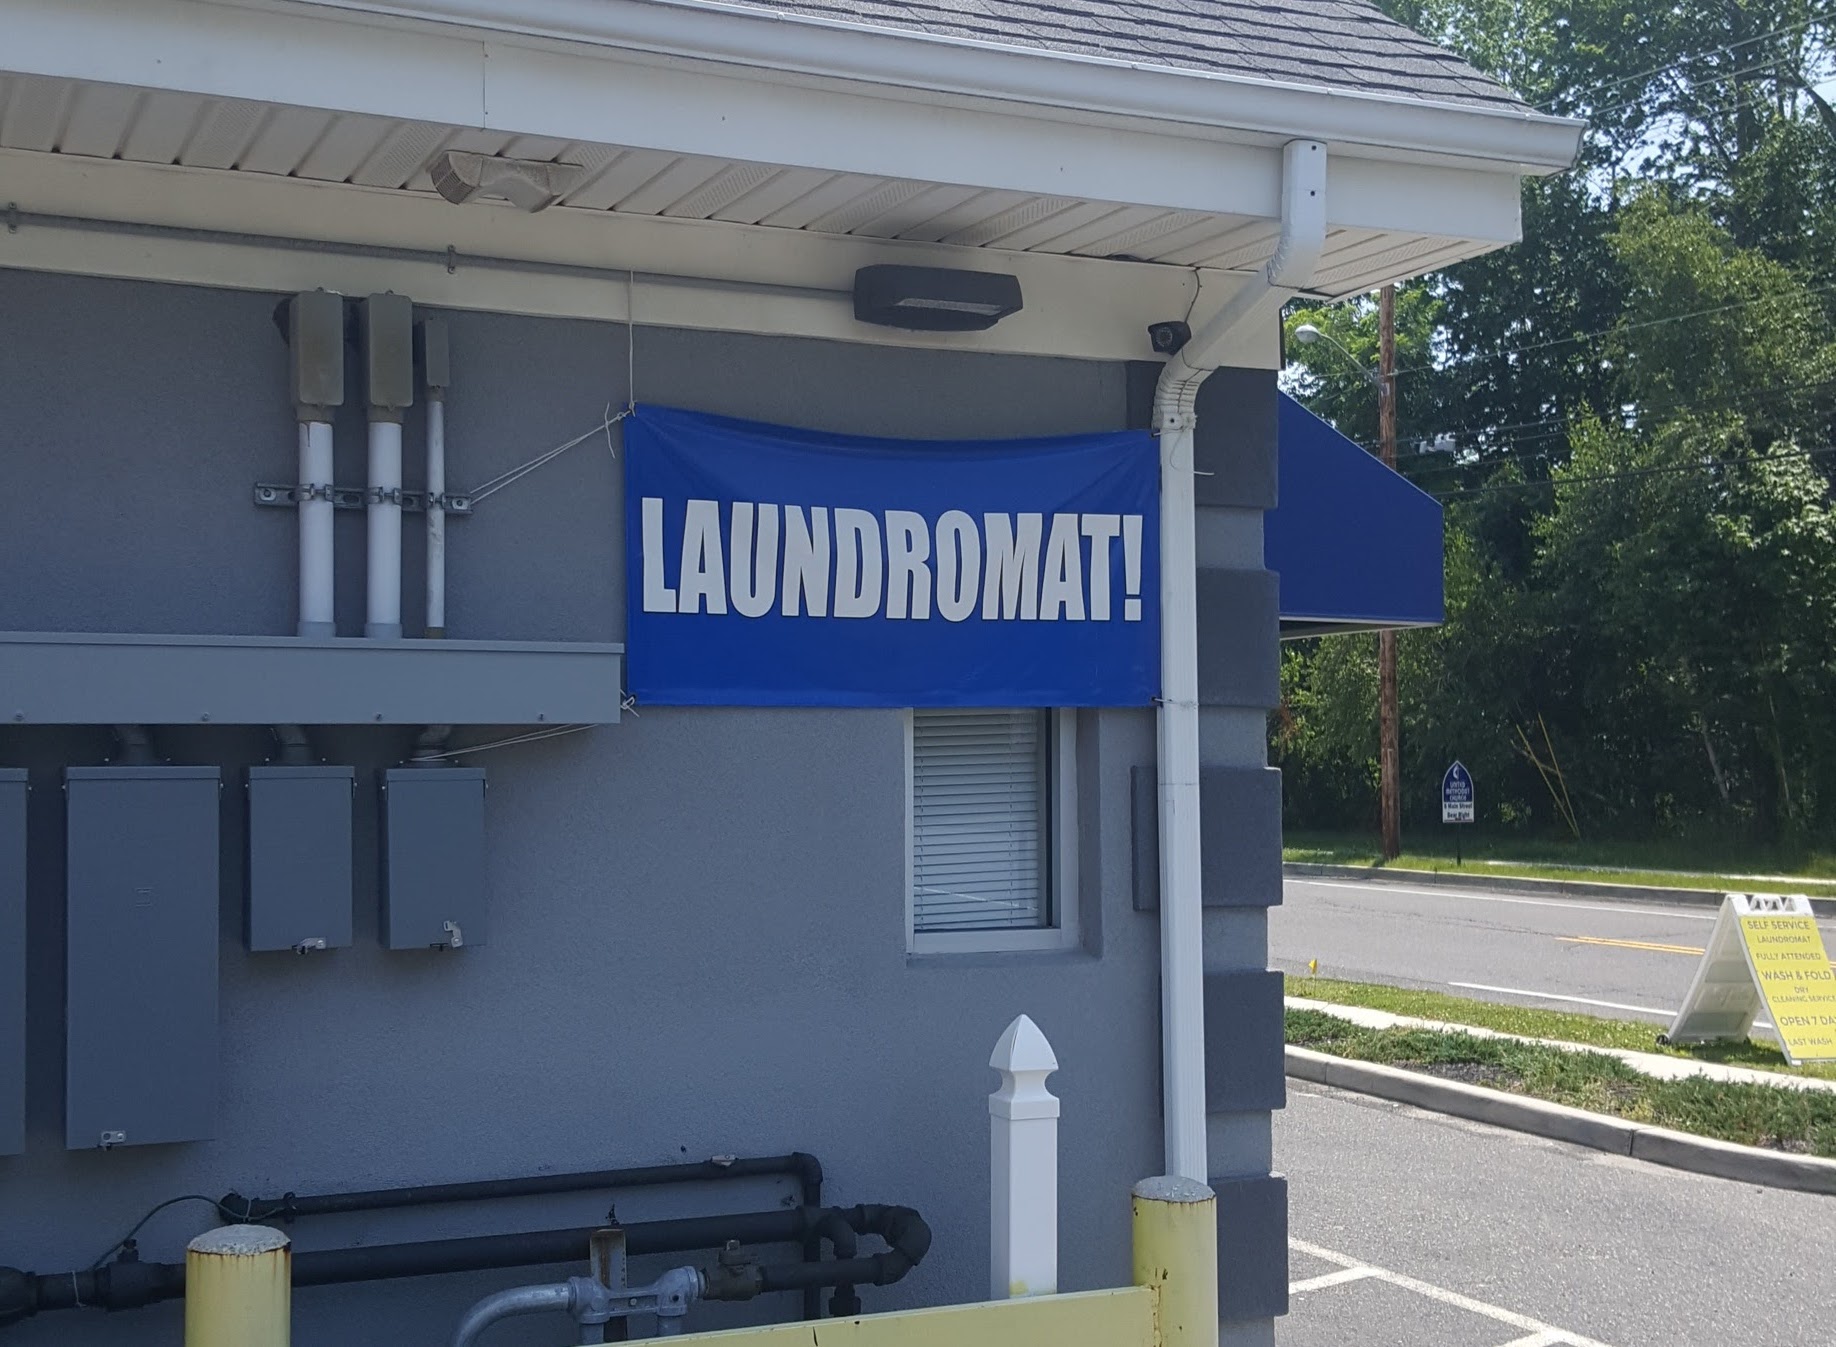 Woody's Country Wash Laundromat 31 W Main St, Farmingdale New Jersey 07727